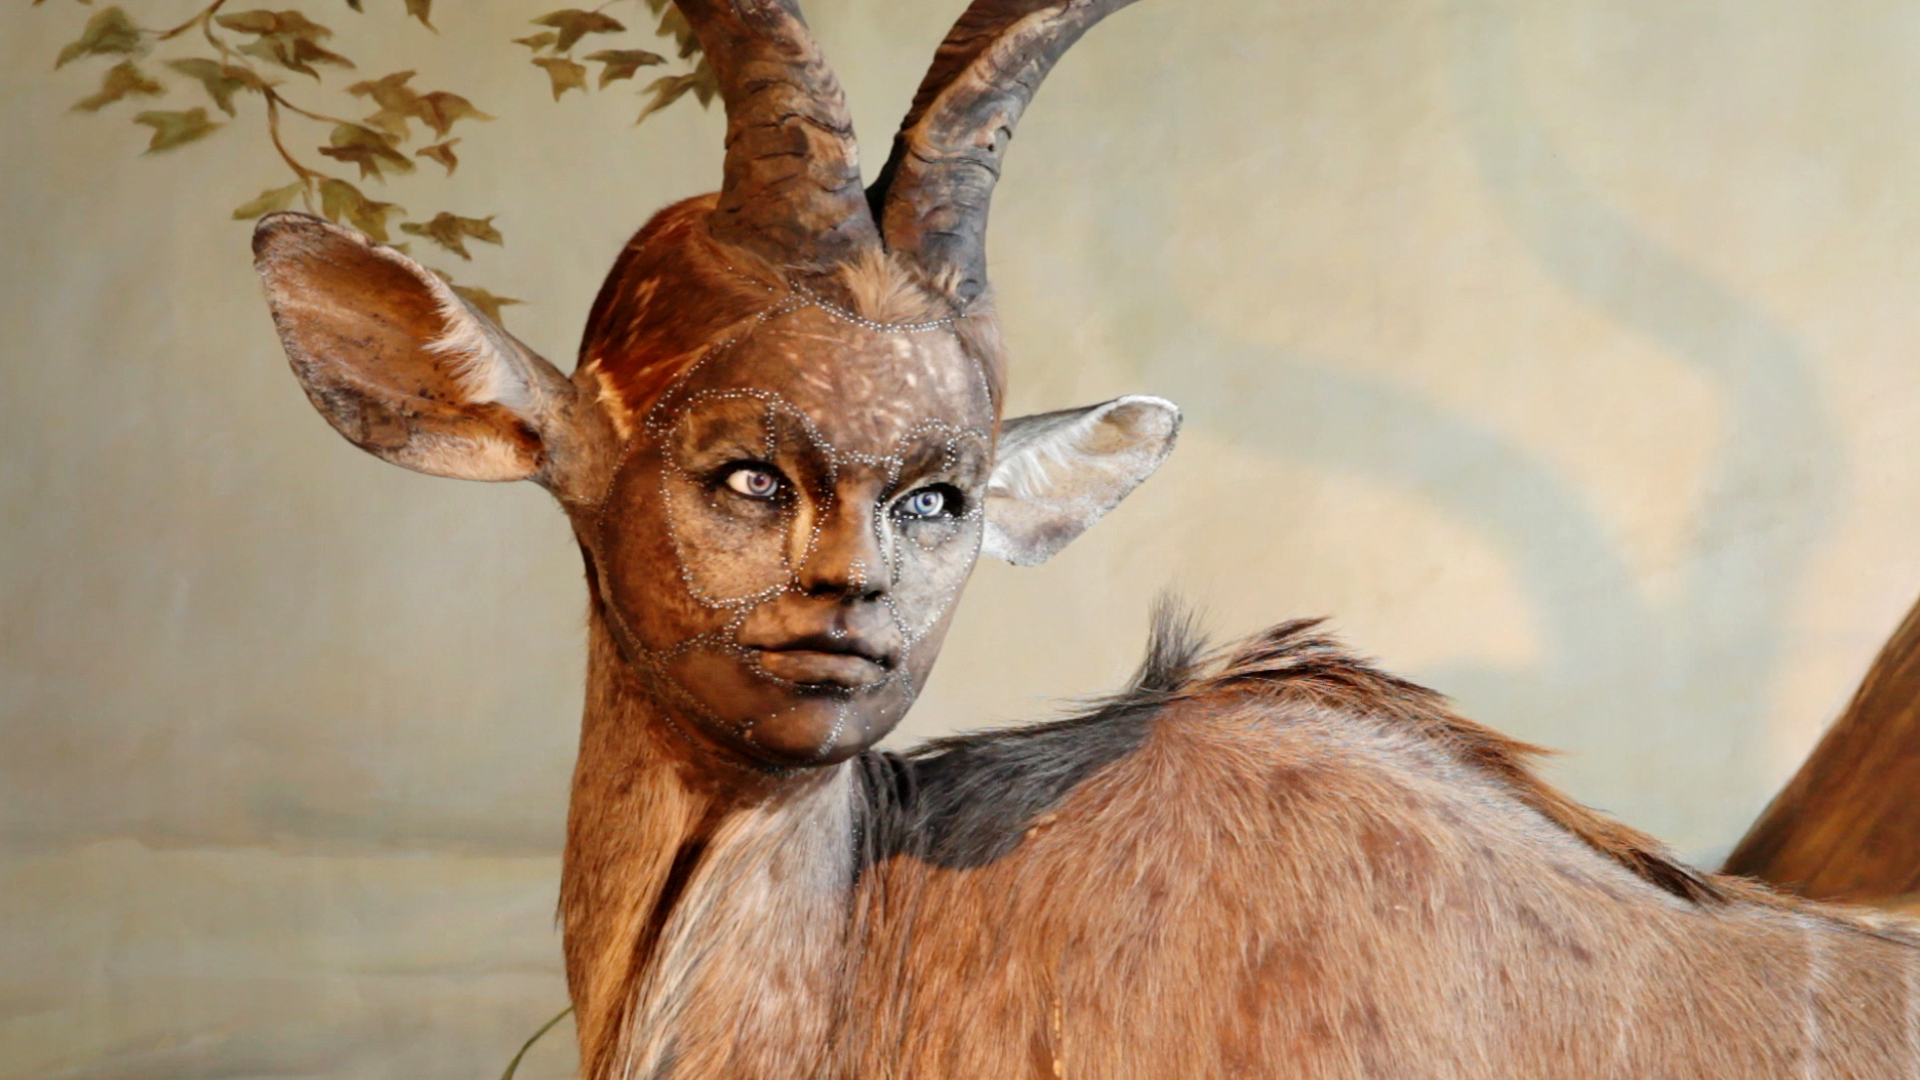 Human-Looking Faces on Animal Bodies: Taxidermy as Art